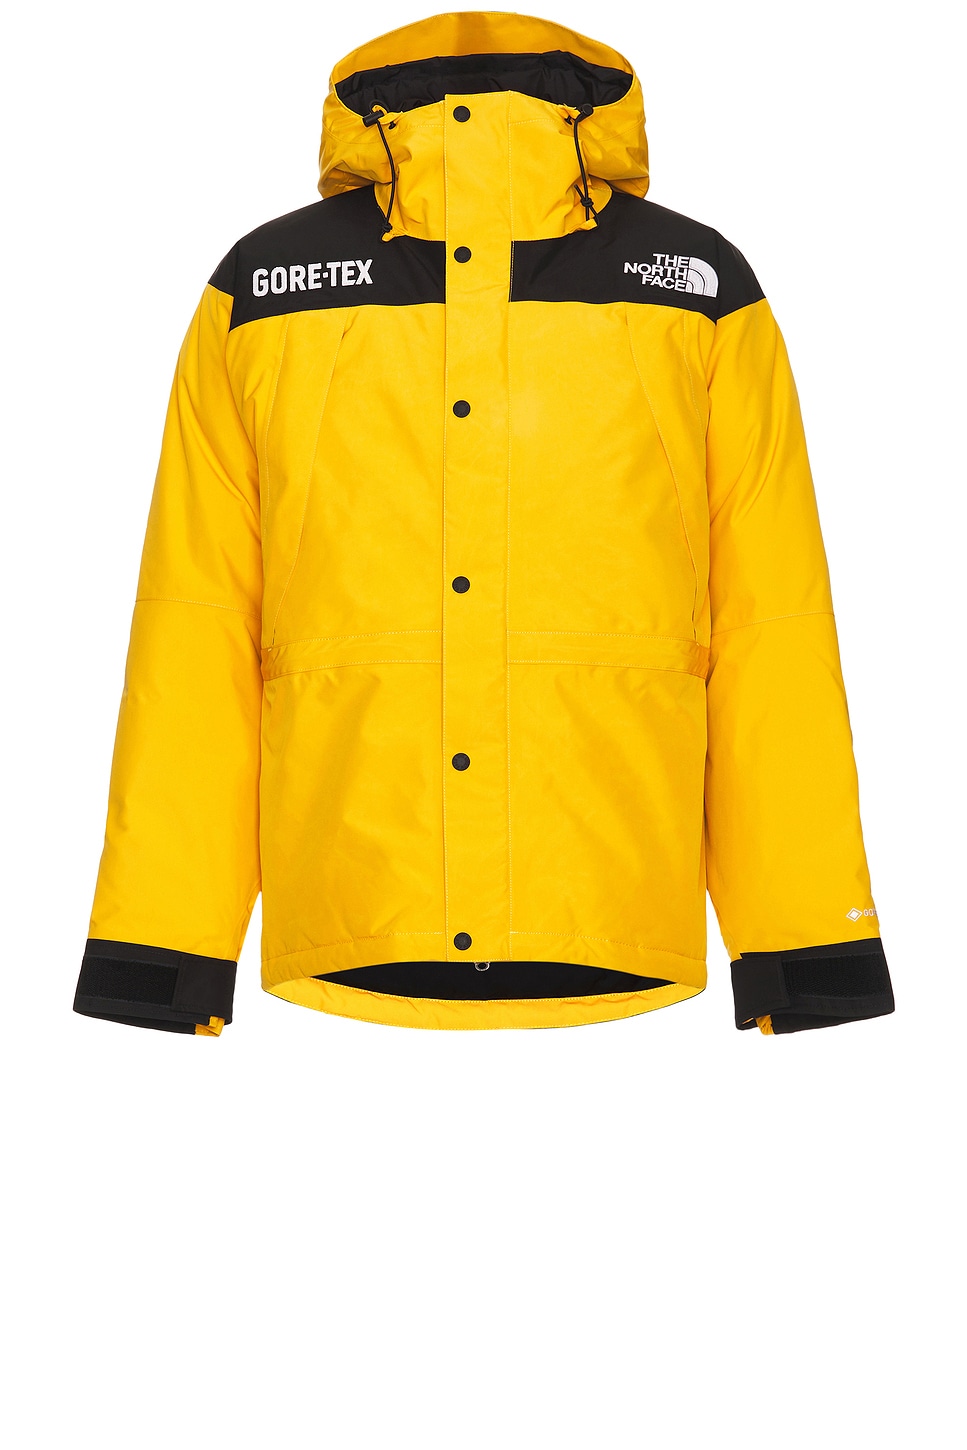 The North Face S GTX Mountain Guide Insulated Jacket in Yellow - Size L